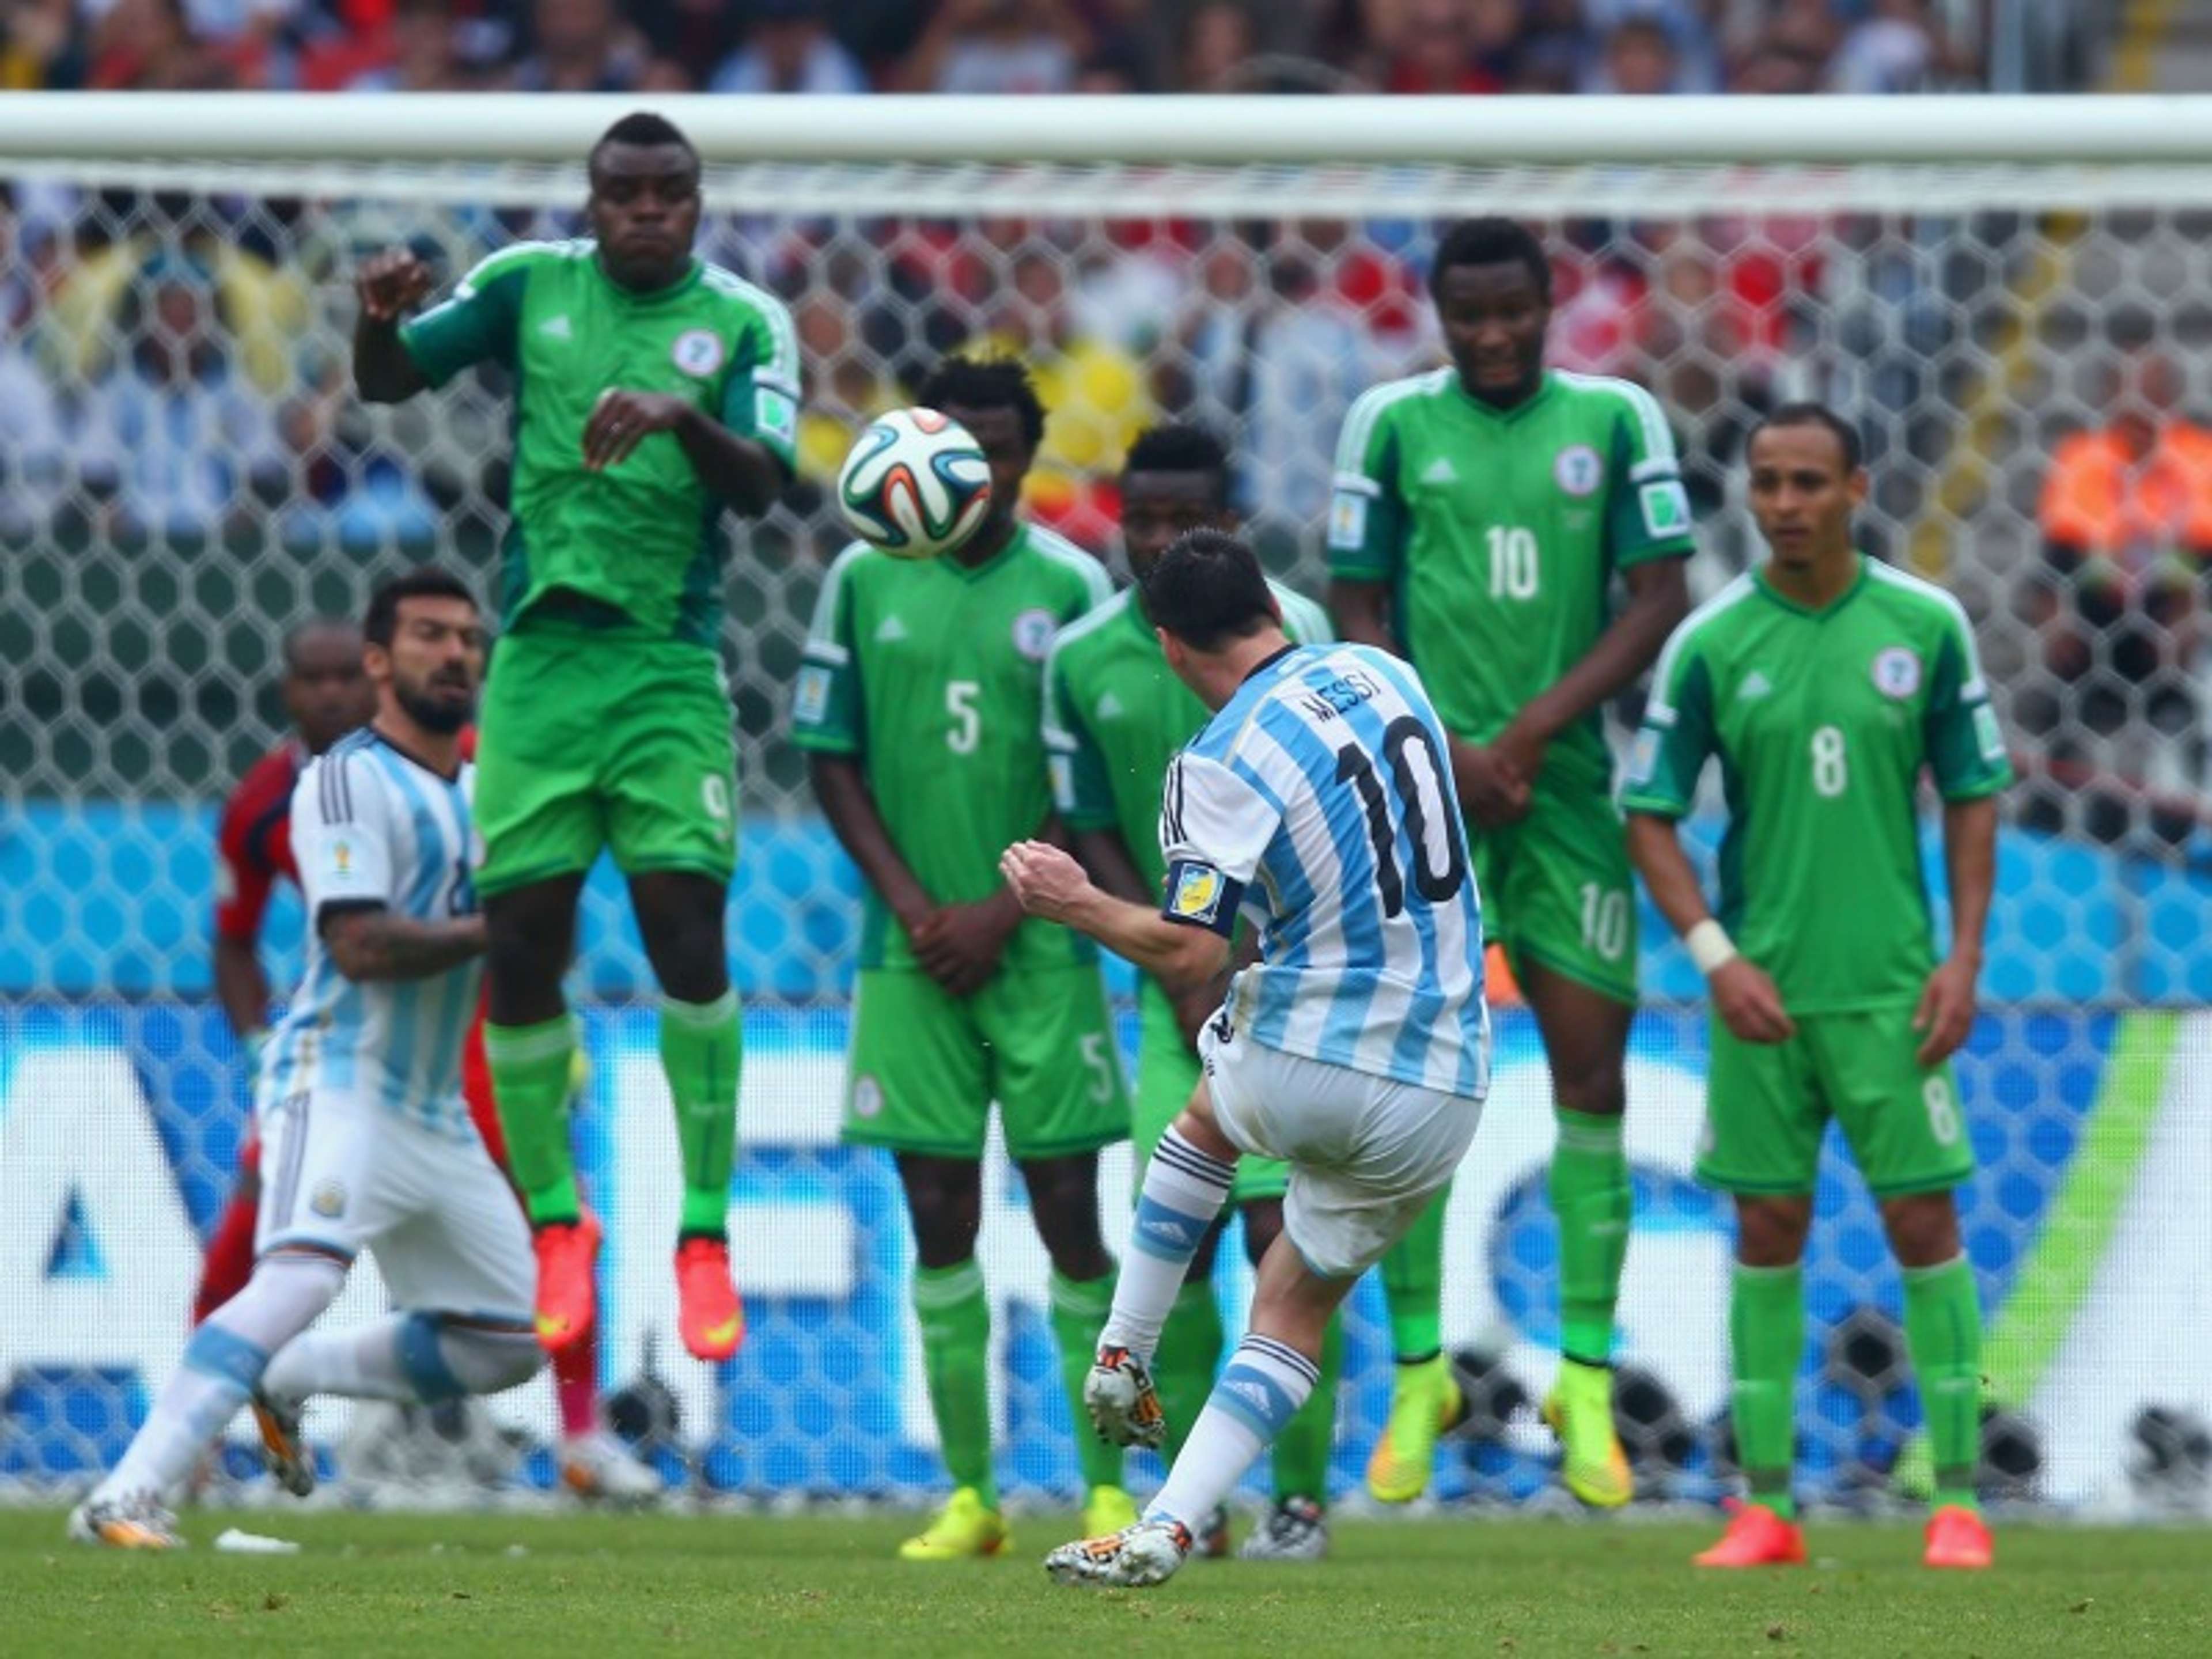 Nigeria Argentina World Cup Group F 06252014